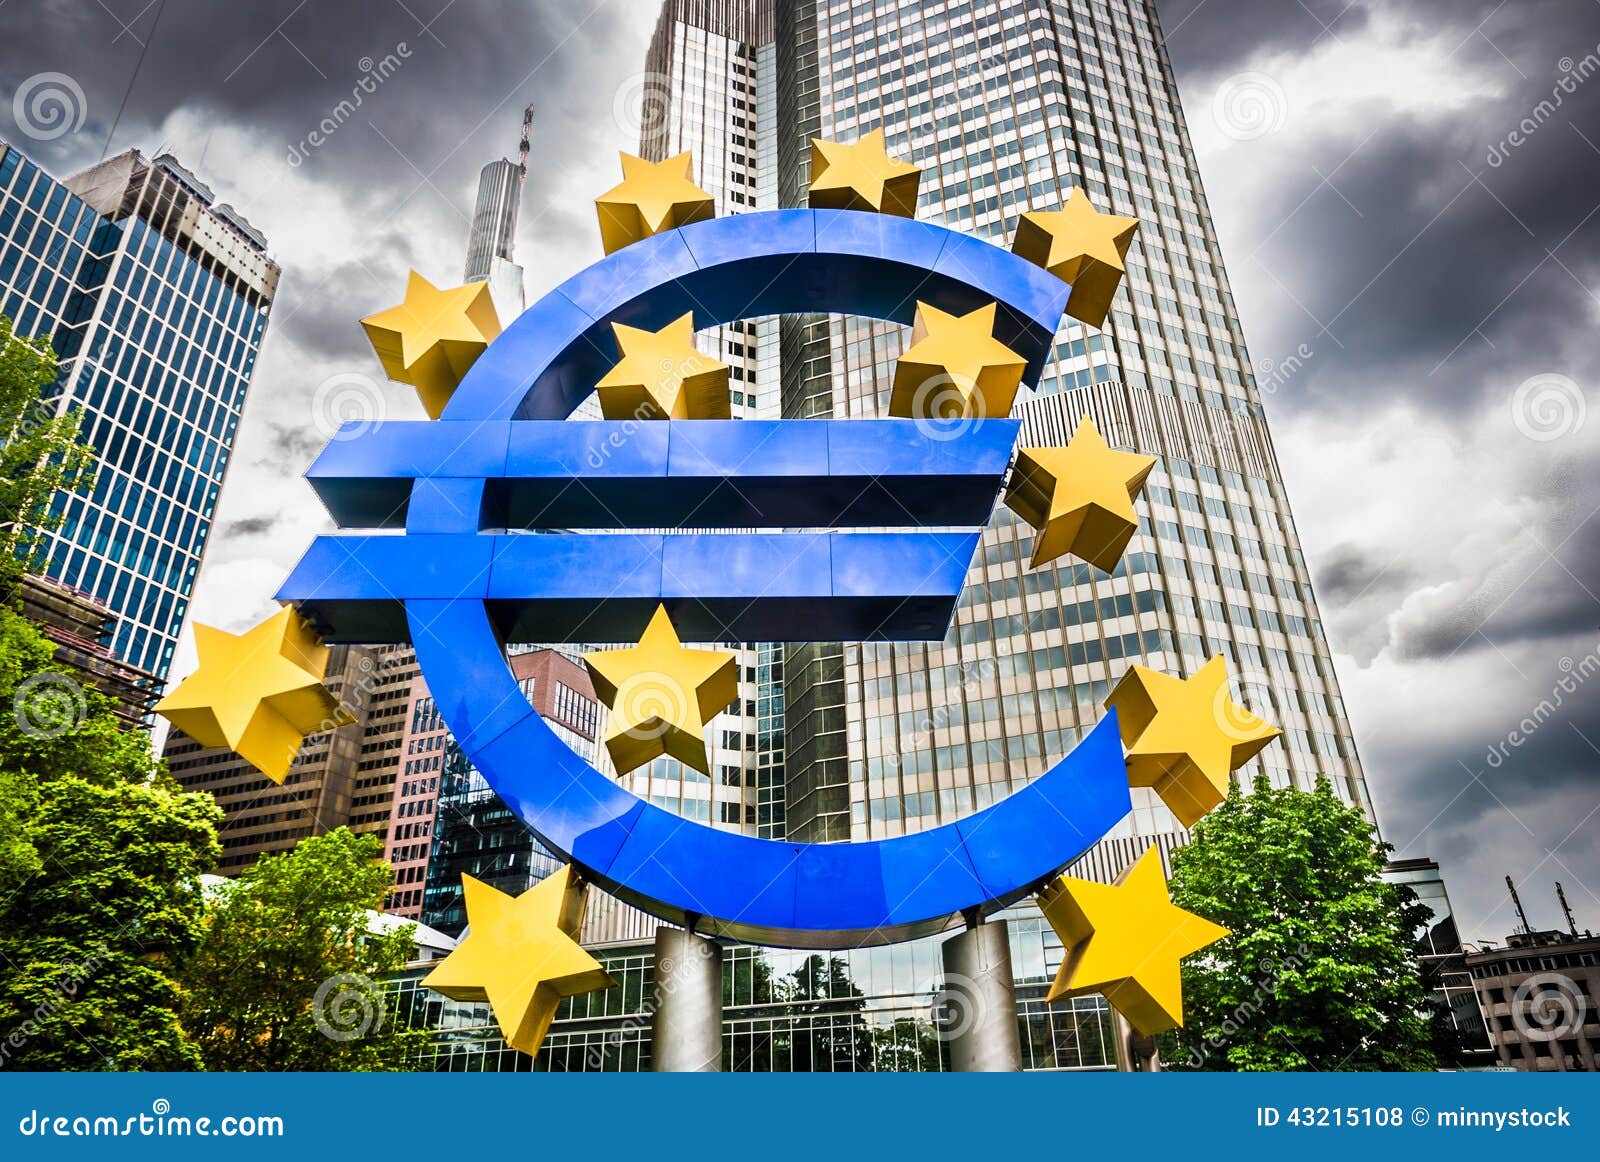 euro sign at european central bank headquarters in frankfurt, germany